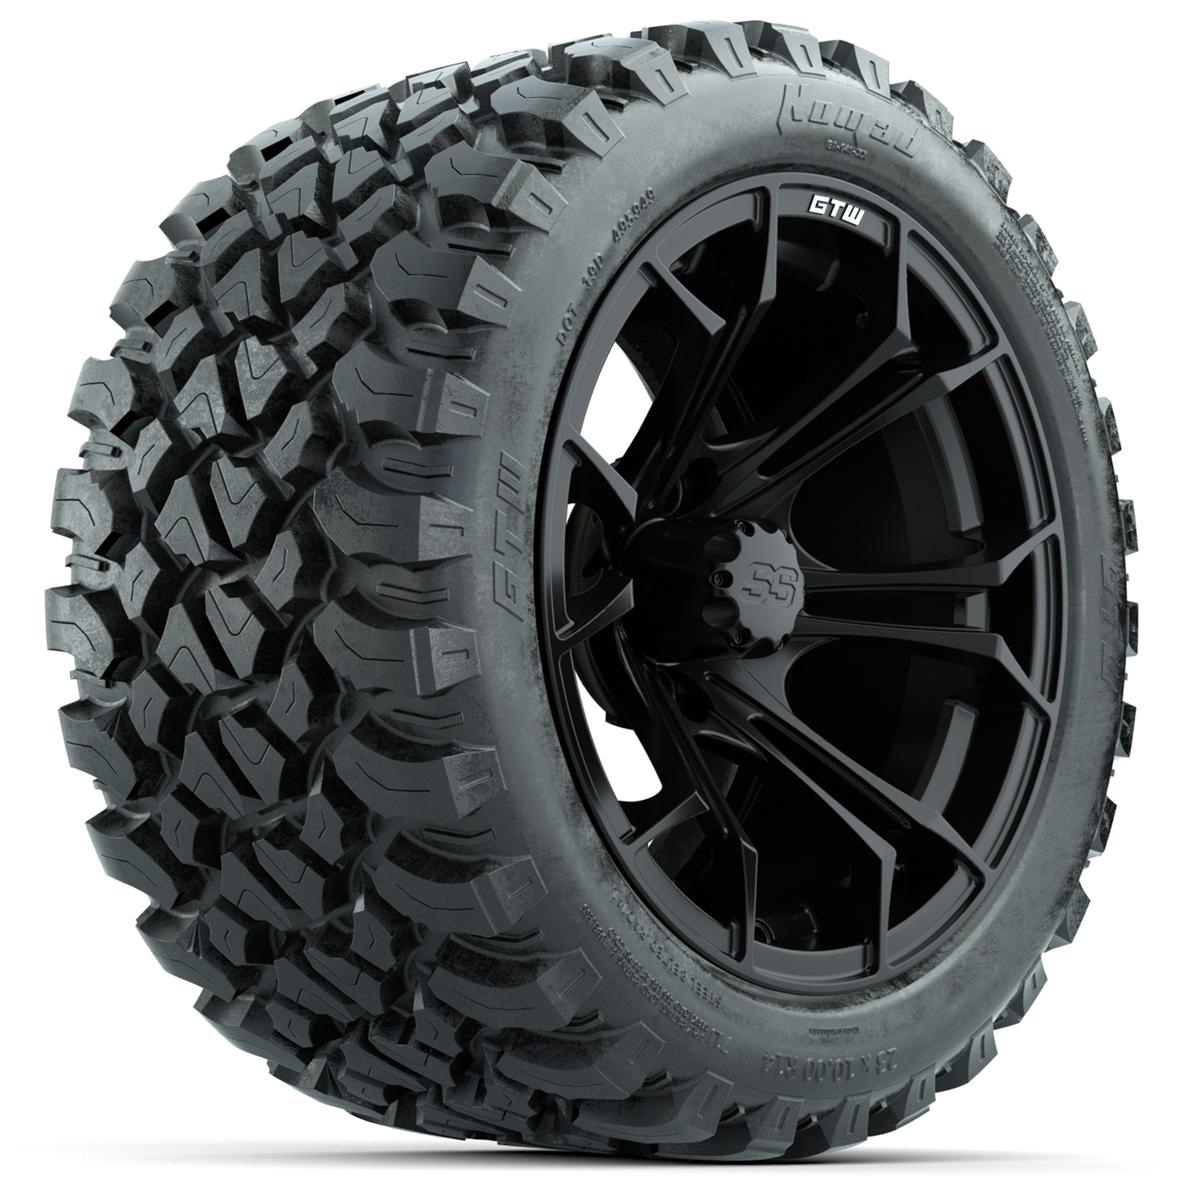 GTW Spyder Matte Black 14 in Wheels with 23x10-14 GTW Nomad All-Terrain Tires – Full Set